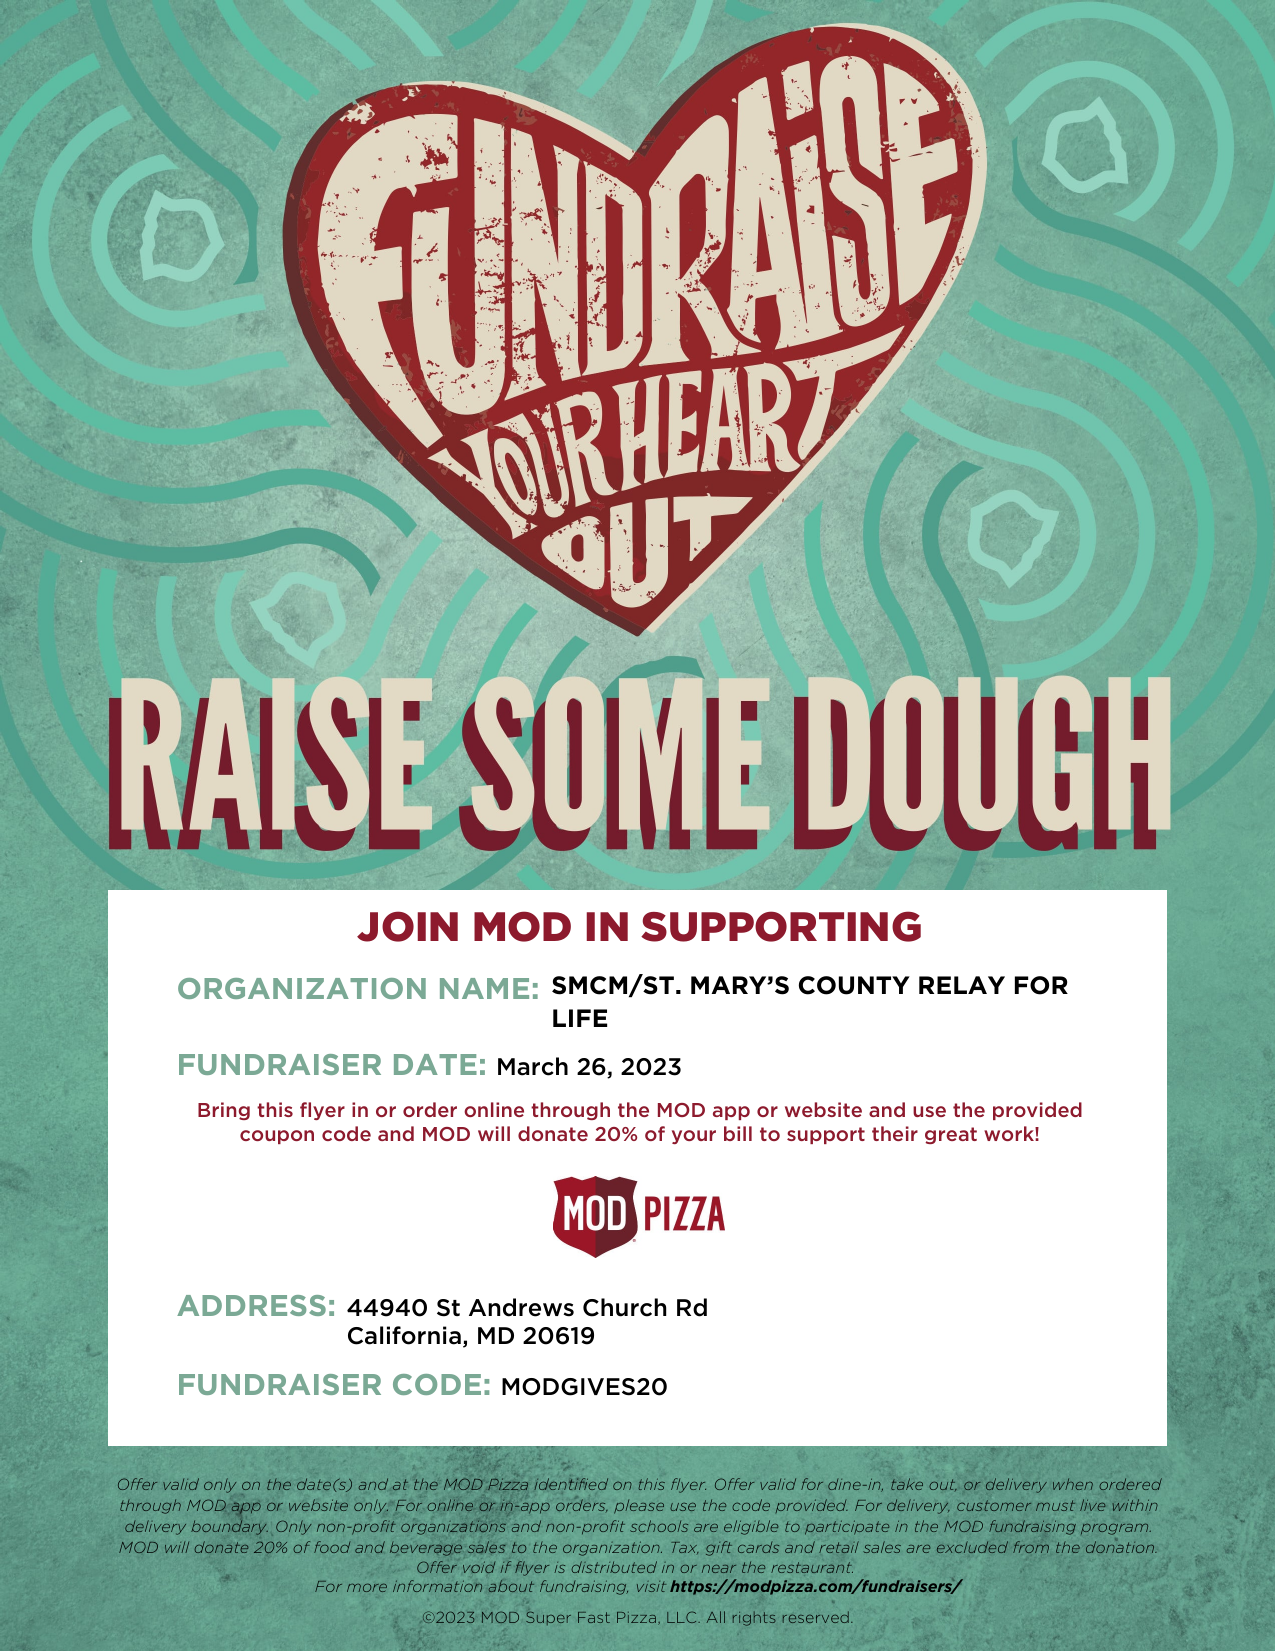 MOD Pizza Fundraiser on 3/26 to support SMCM/St. Mary's County Relay